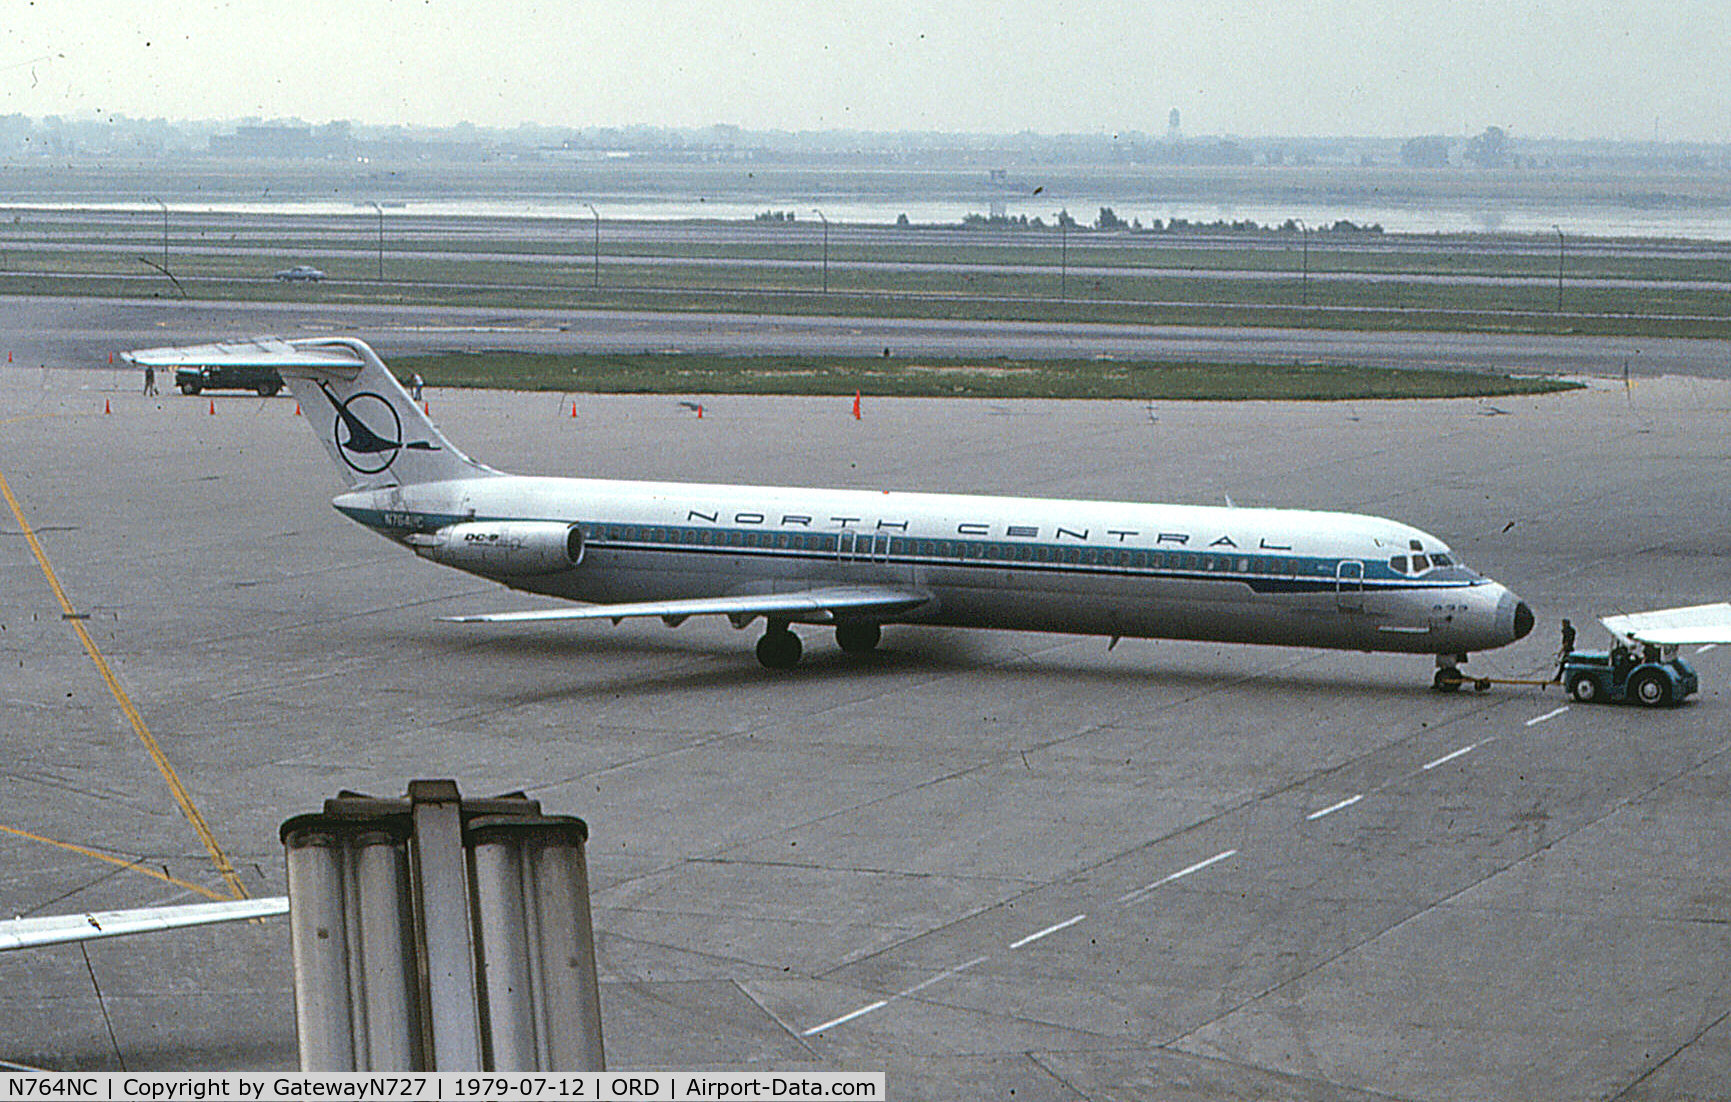 N764NC, 1976 Douglas DC-9-51 C/N 47717, Taken from an observation deck at O'Hare, long since closed to the public.